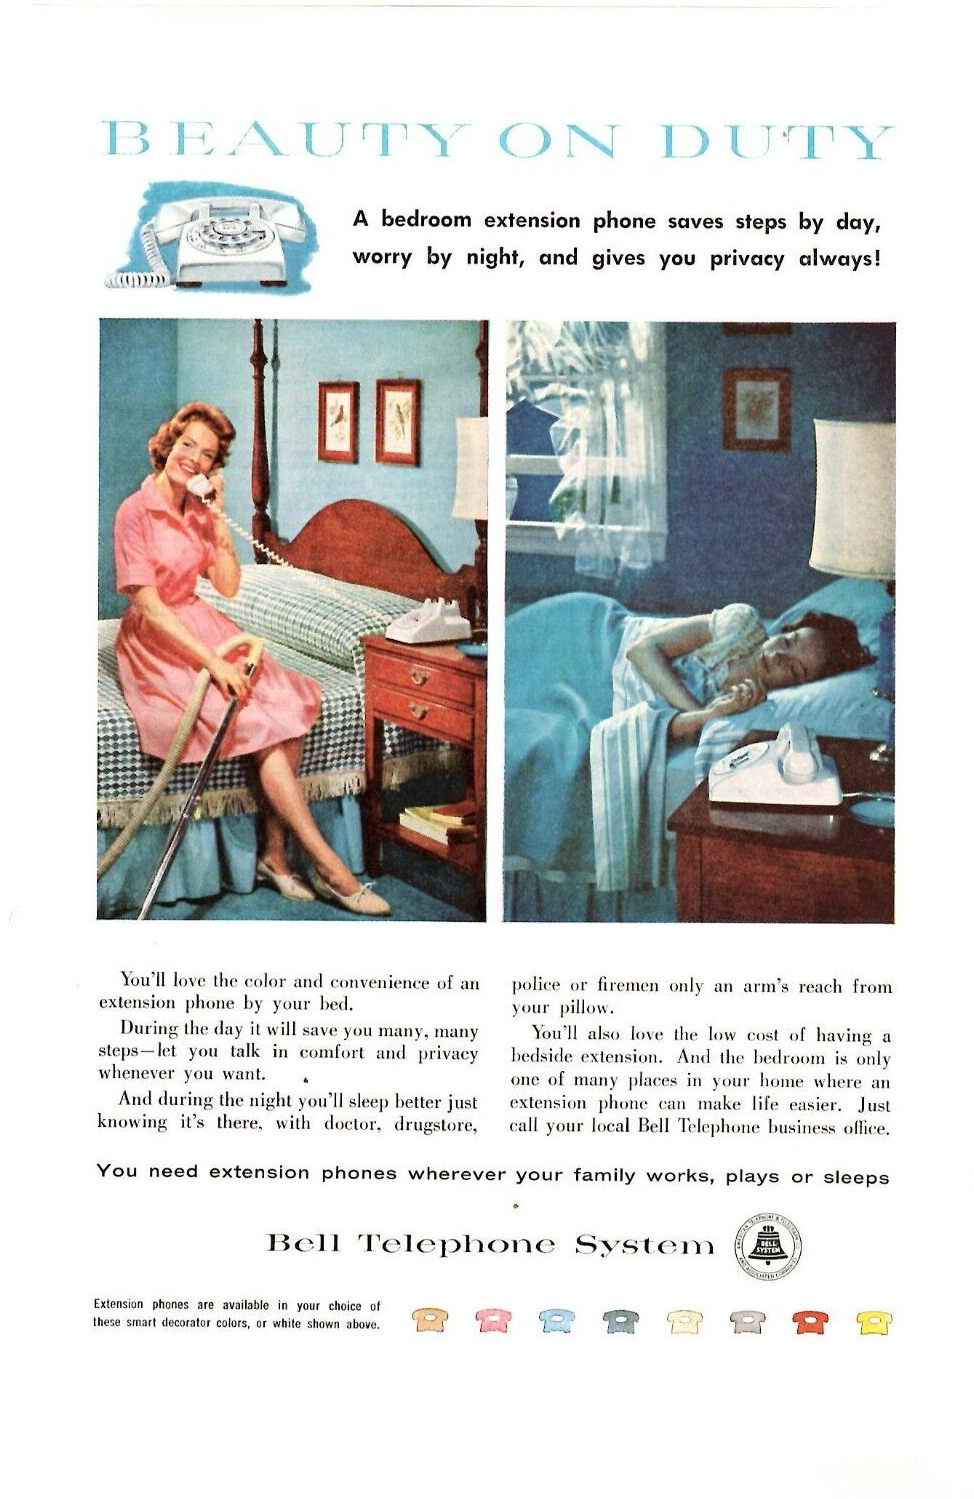 1959 Print Ad Bell Telephone System Bedroon Extension Phone Saves Steps by Day